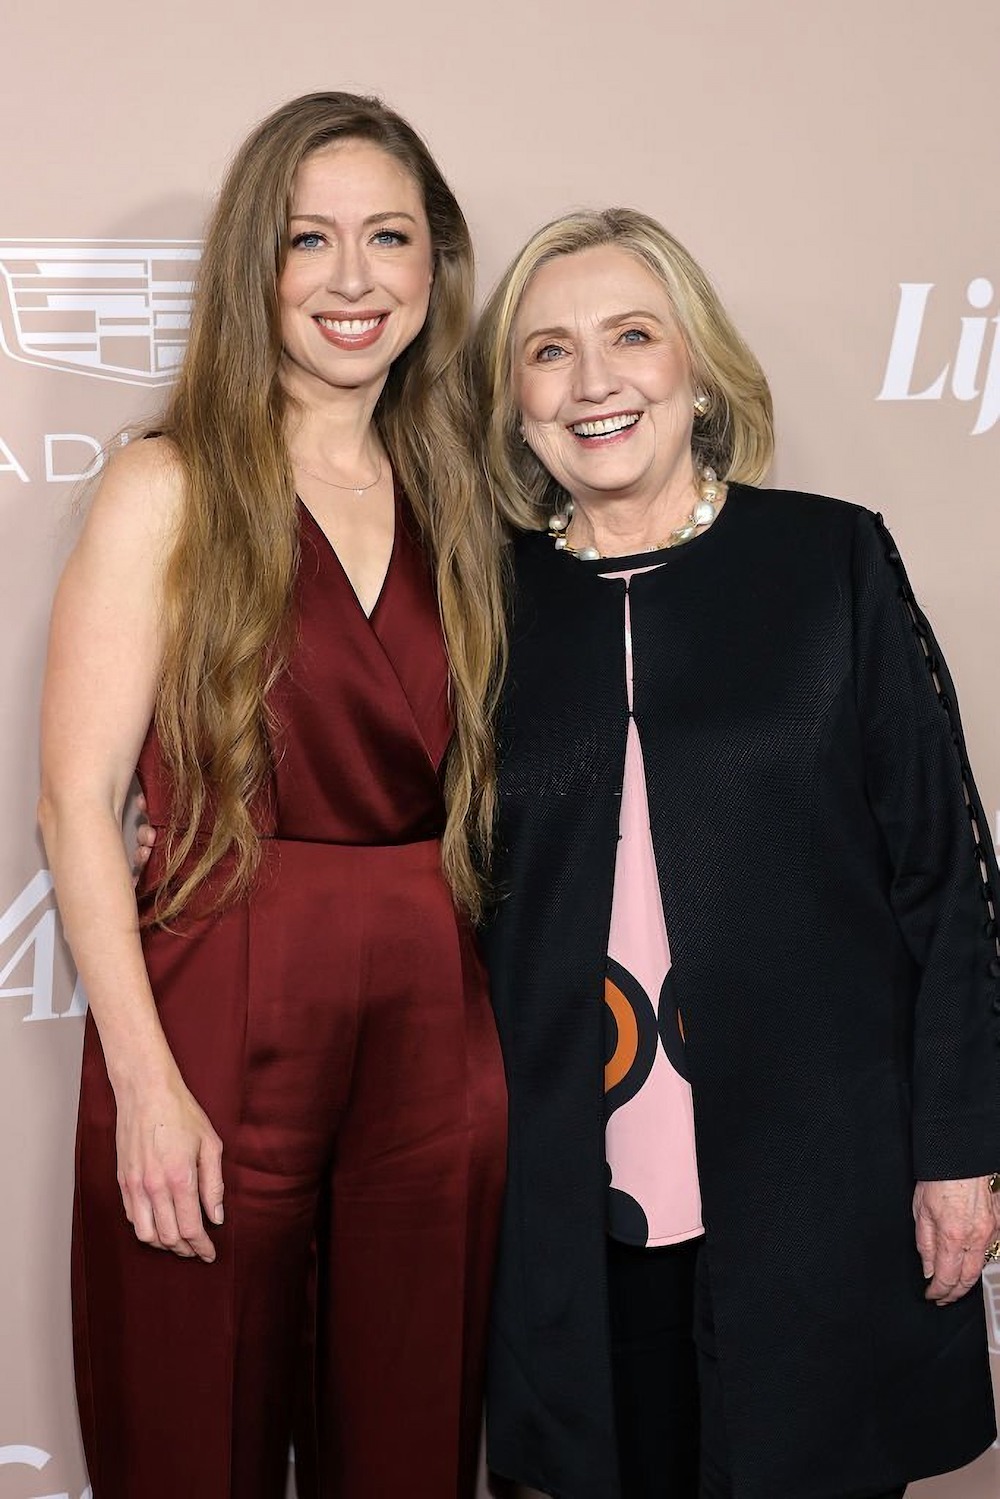 Hilary Clinton and Daughter Chelsea Honored at Variety’s 2022 Power of Women Event